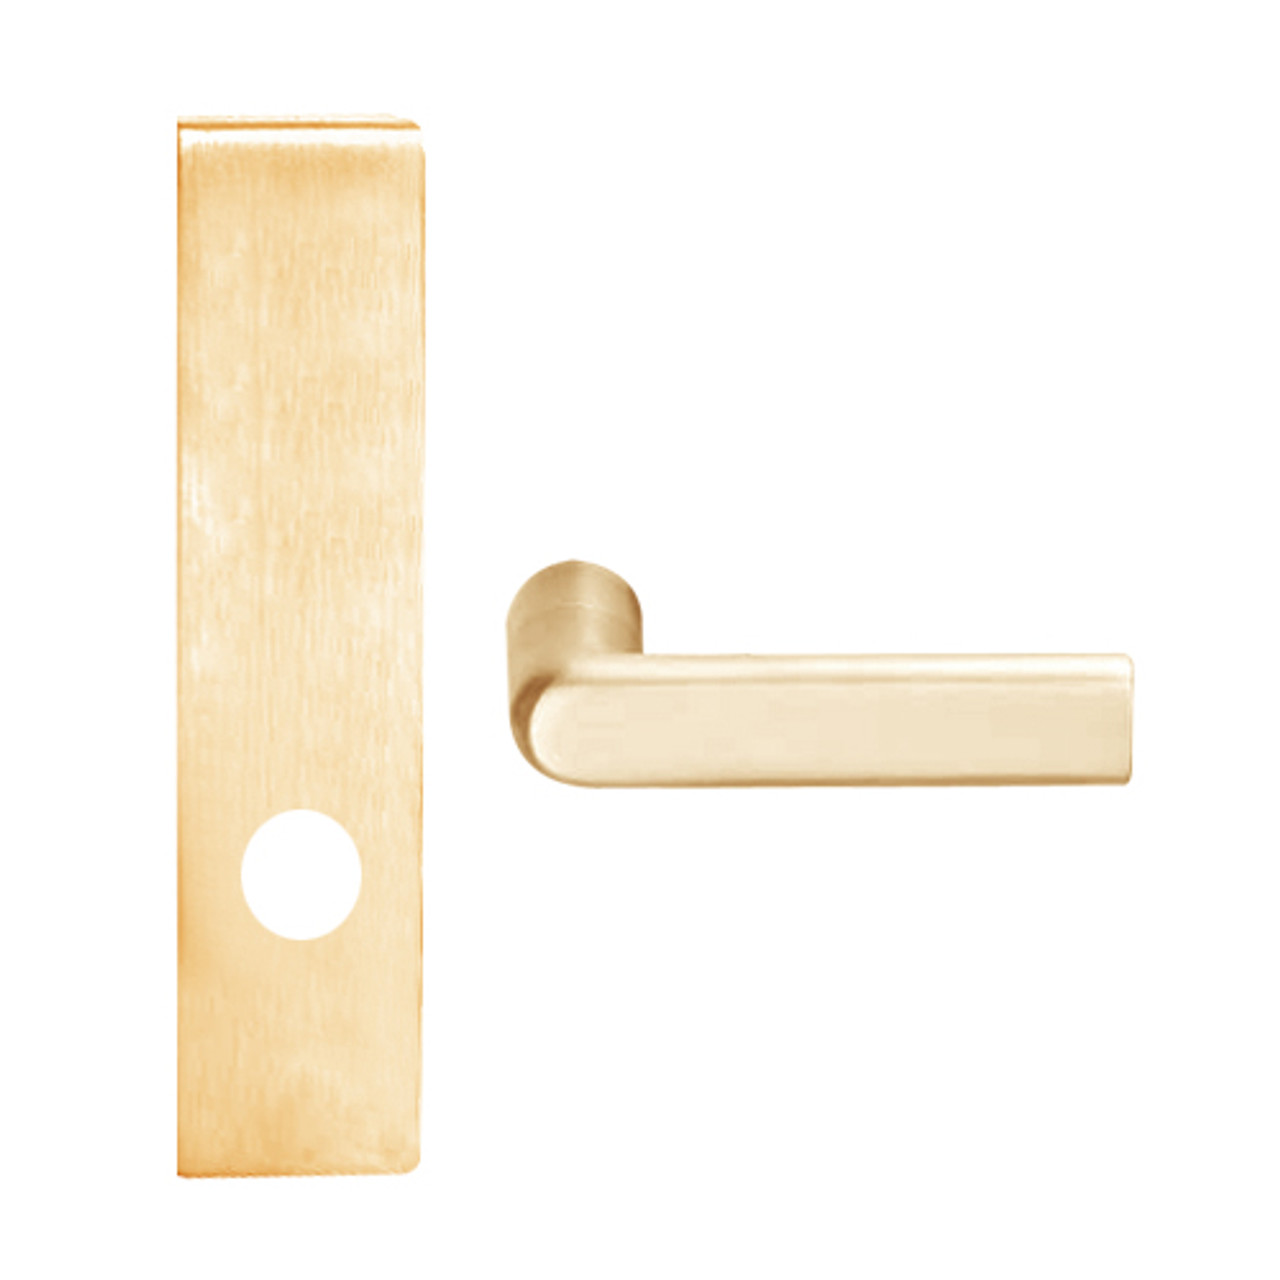 L9025-01L-612 Schlage L Series Exit Commercial Mortise Lock with 01 Cast Lever Design in Satin Bronze